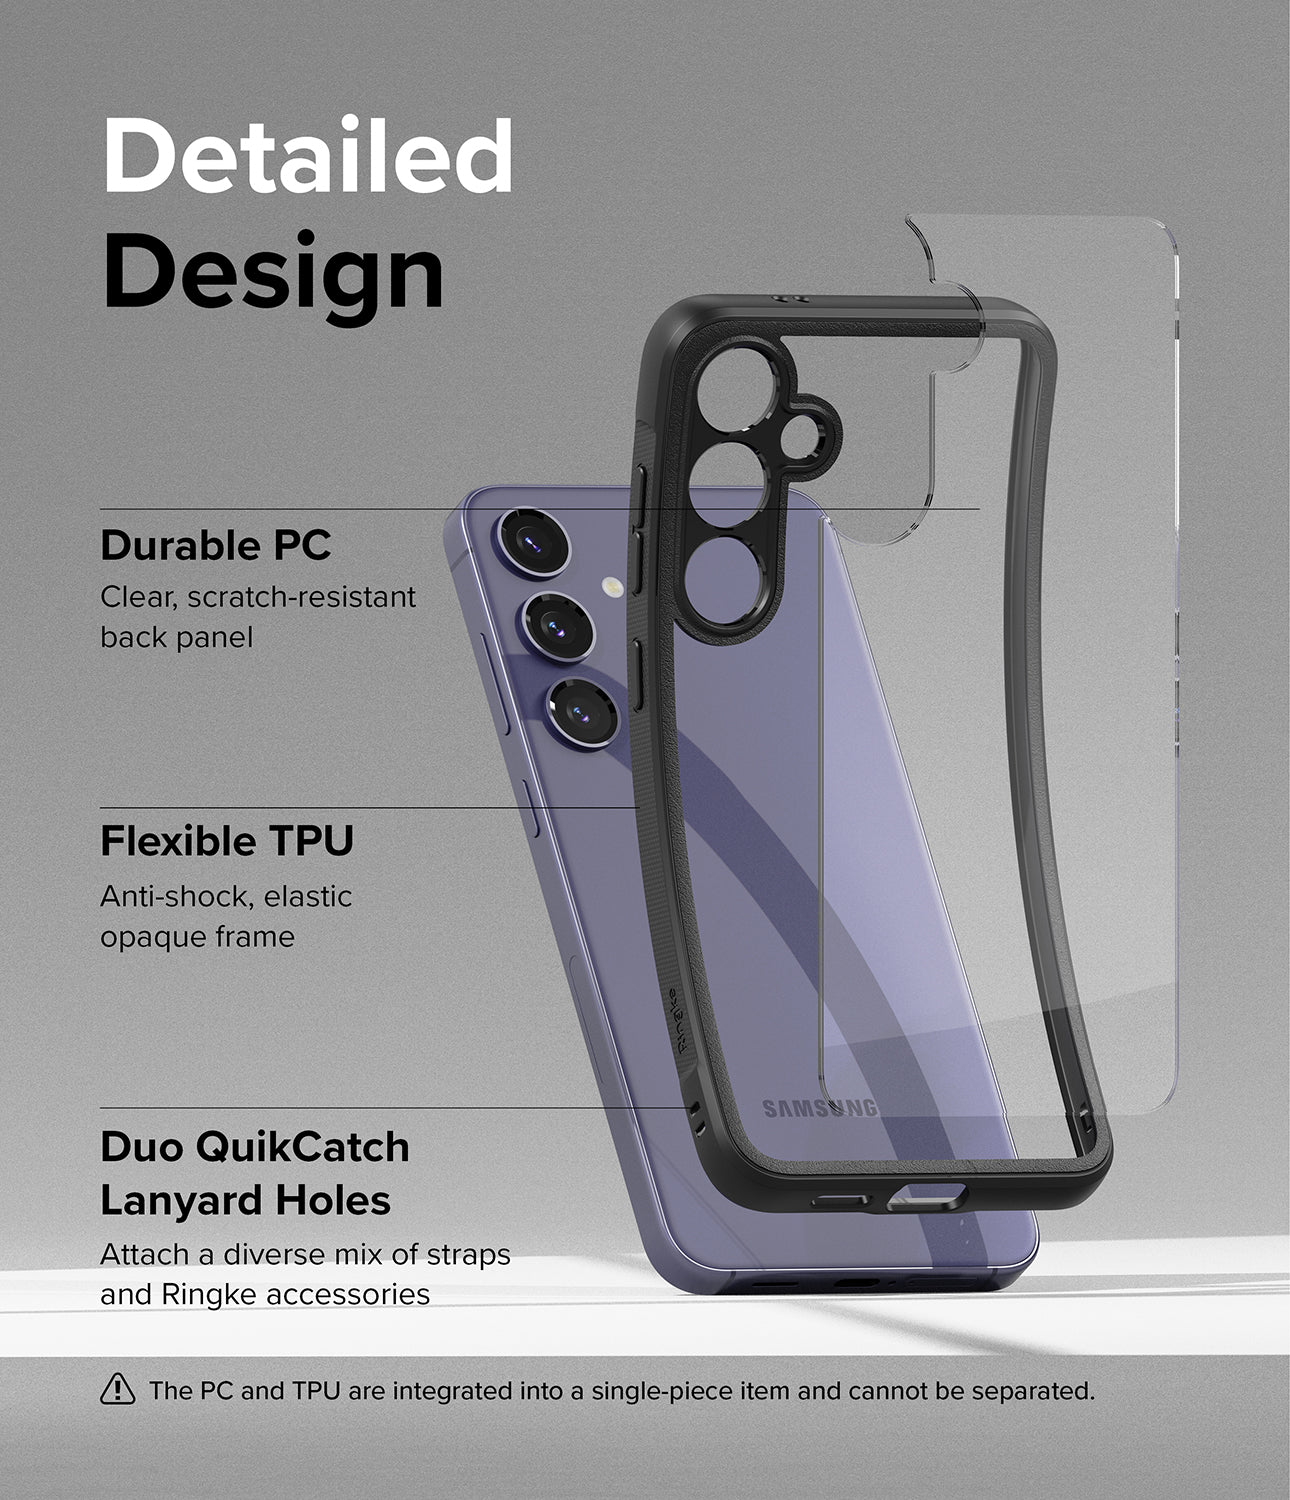 Galaxy S24 Plus Case | Fusion Bold - Detailed Design. Clear, scratch-resistant back panel with durable PC. Anti-shock, elastic opaque frame with flexible TPU. Duo QuikCatch Lanyard Holes to attach a diverse mix of straps and Ringke accessories.